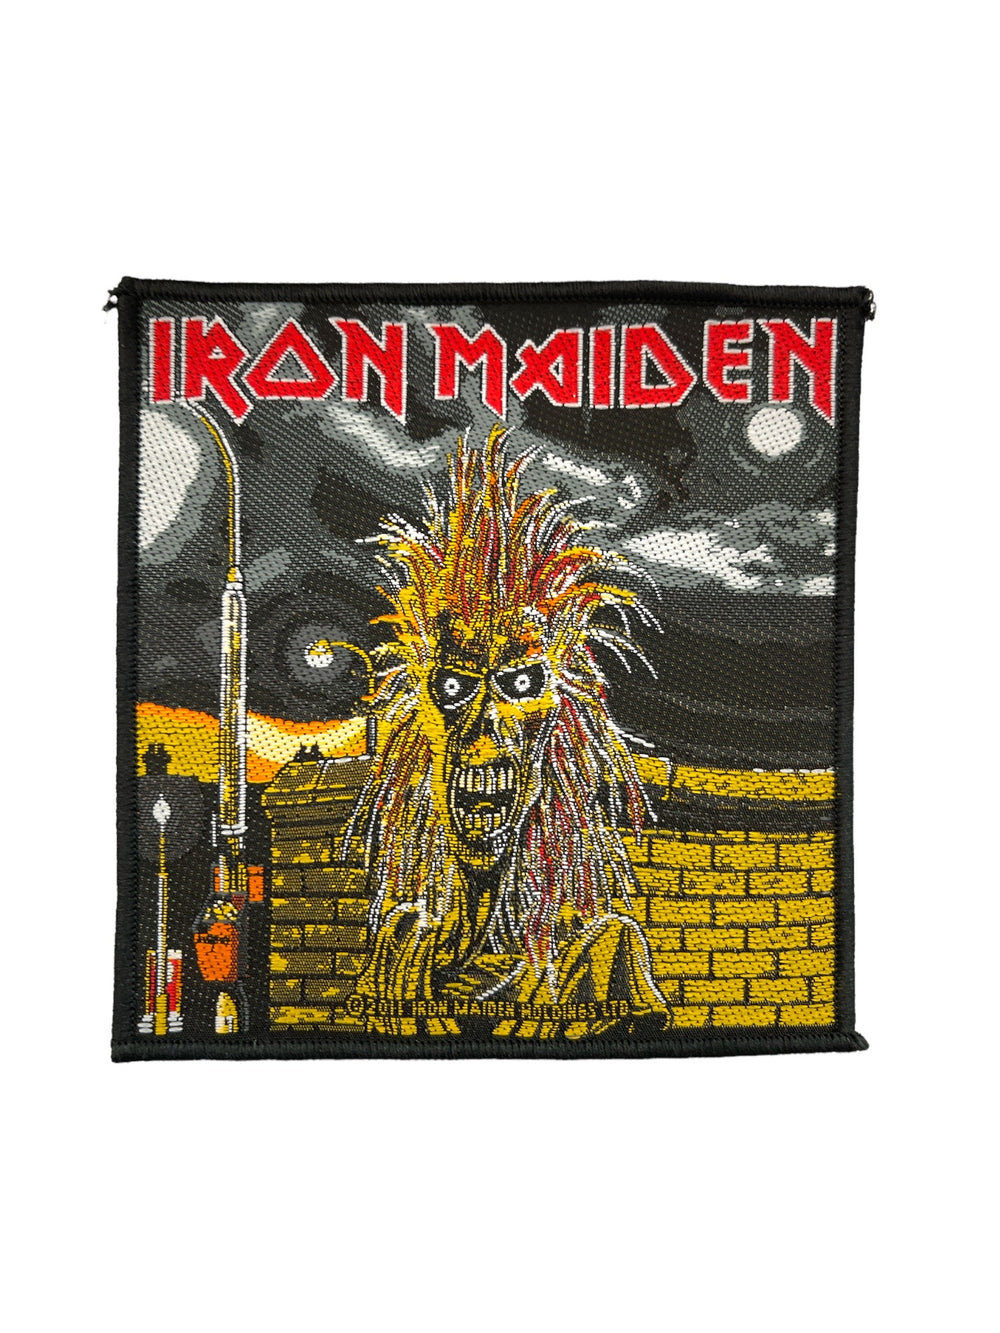 Iron Maiden First Album Official Woven Patch Brand New